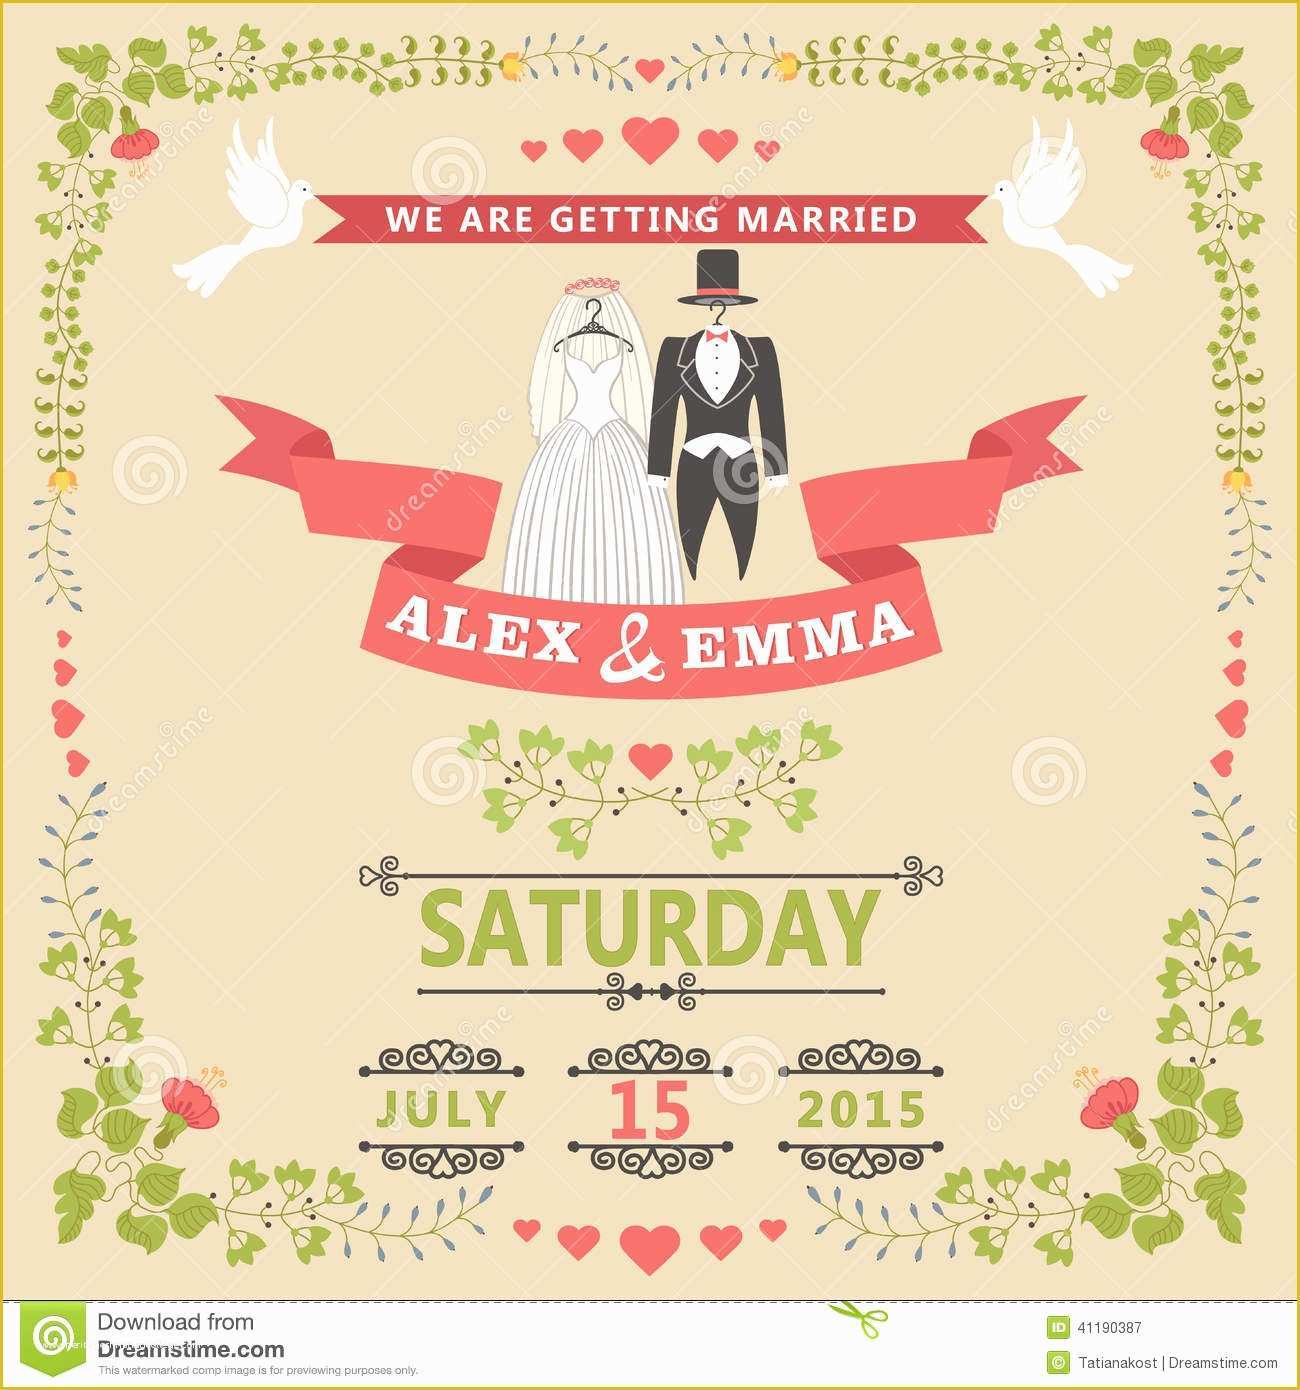 Save the Date Invitation Templates Free Of Save the Dates and Wedding Invitations